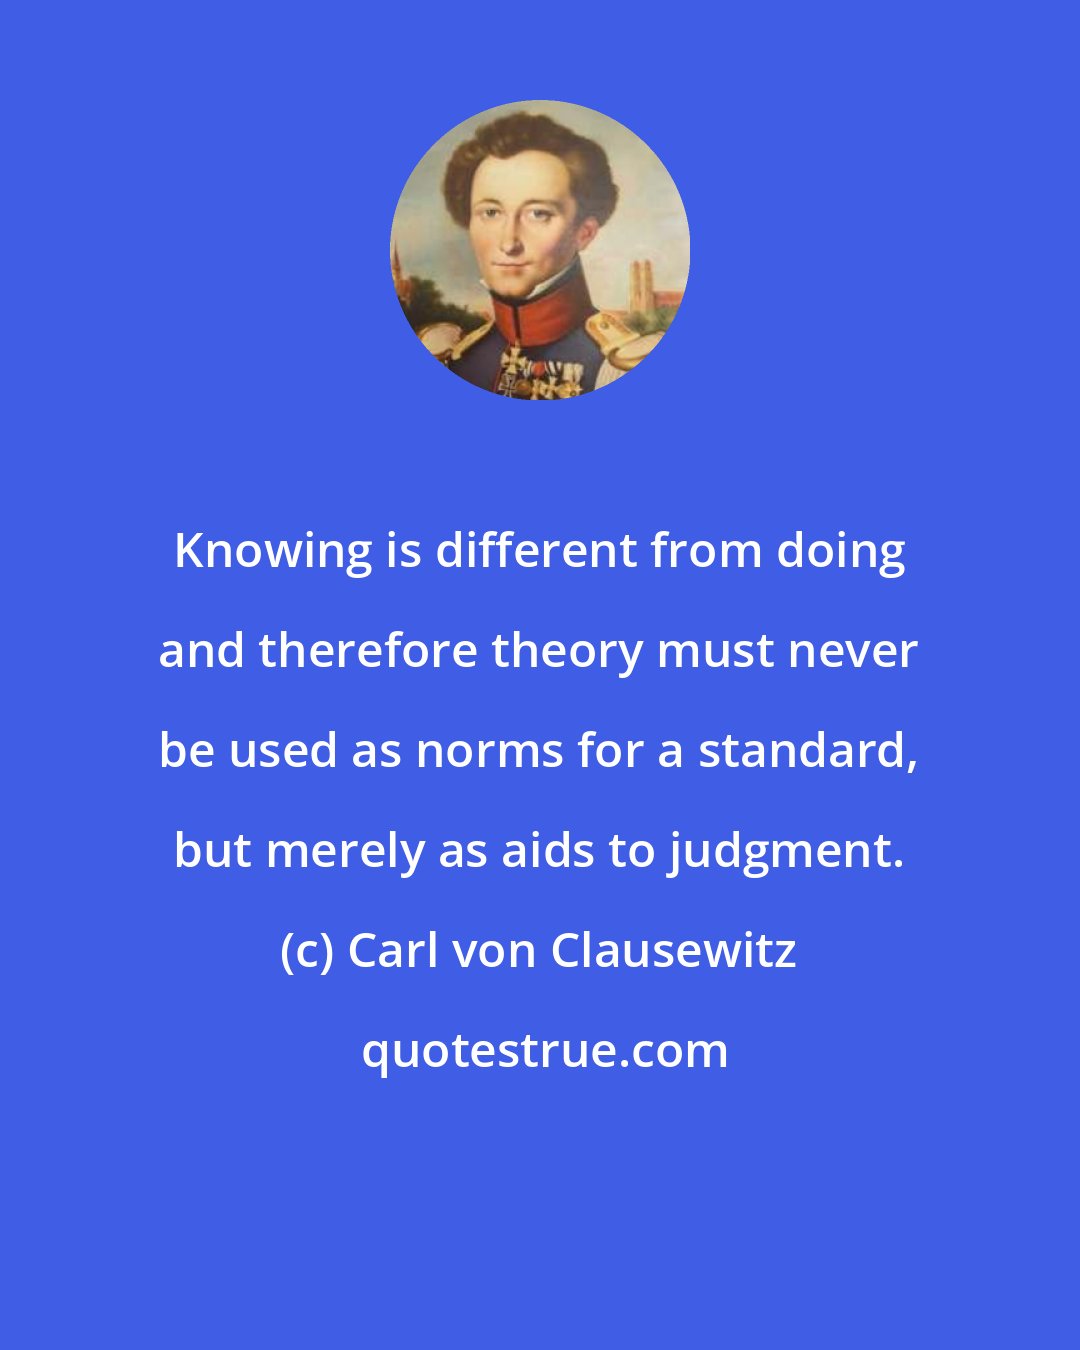 Carl von Clausewitz: Knowing is different from doing and therefore theory must never be used as norms for a standard, but merely as aids to judgment.